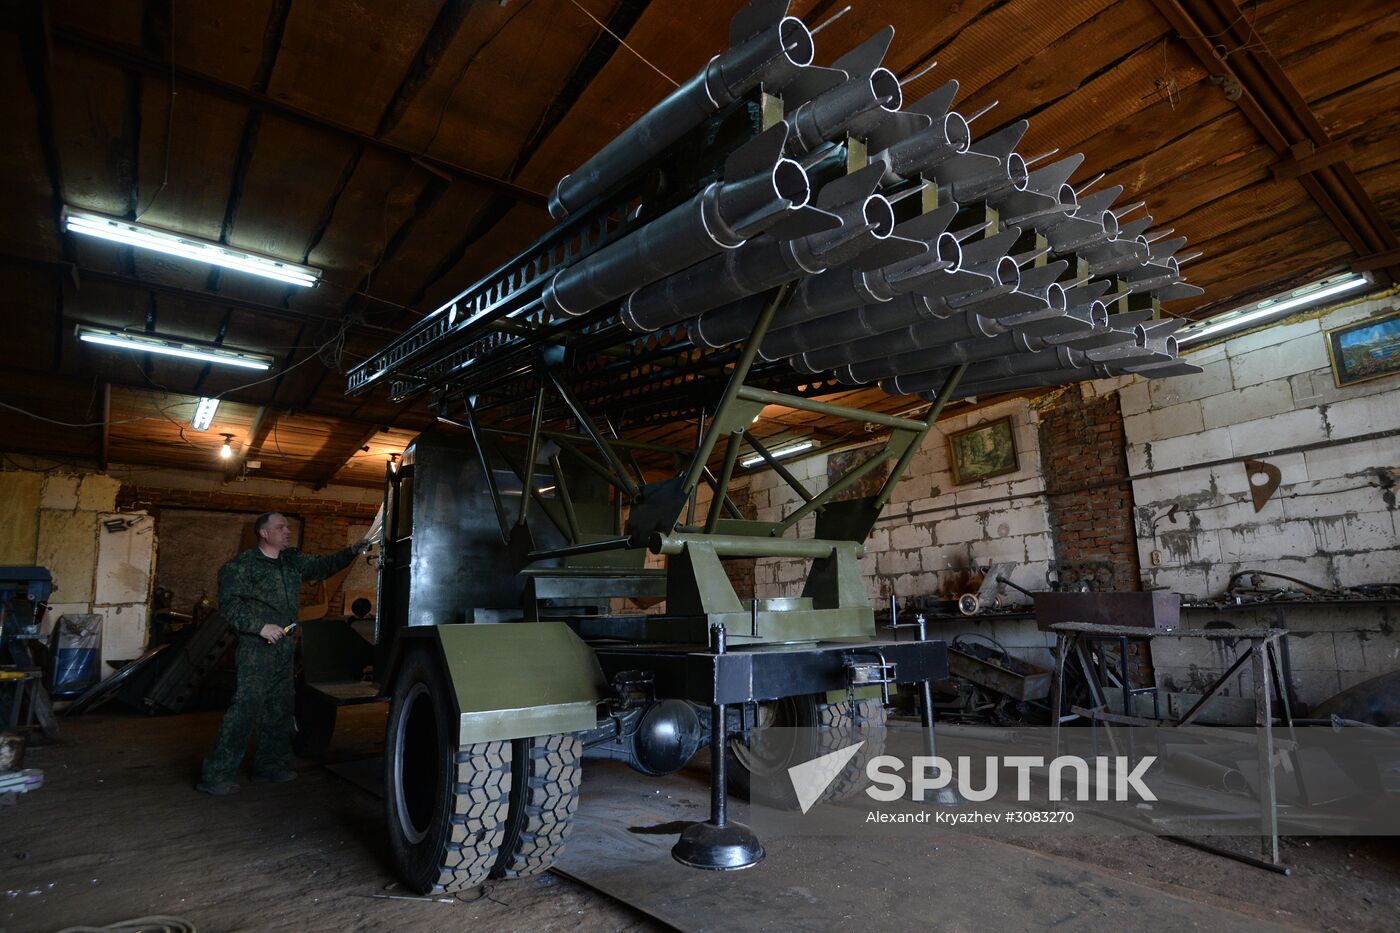 Manufacturing full-size models of WWII military vehicles in Novosibirsk Region